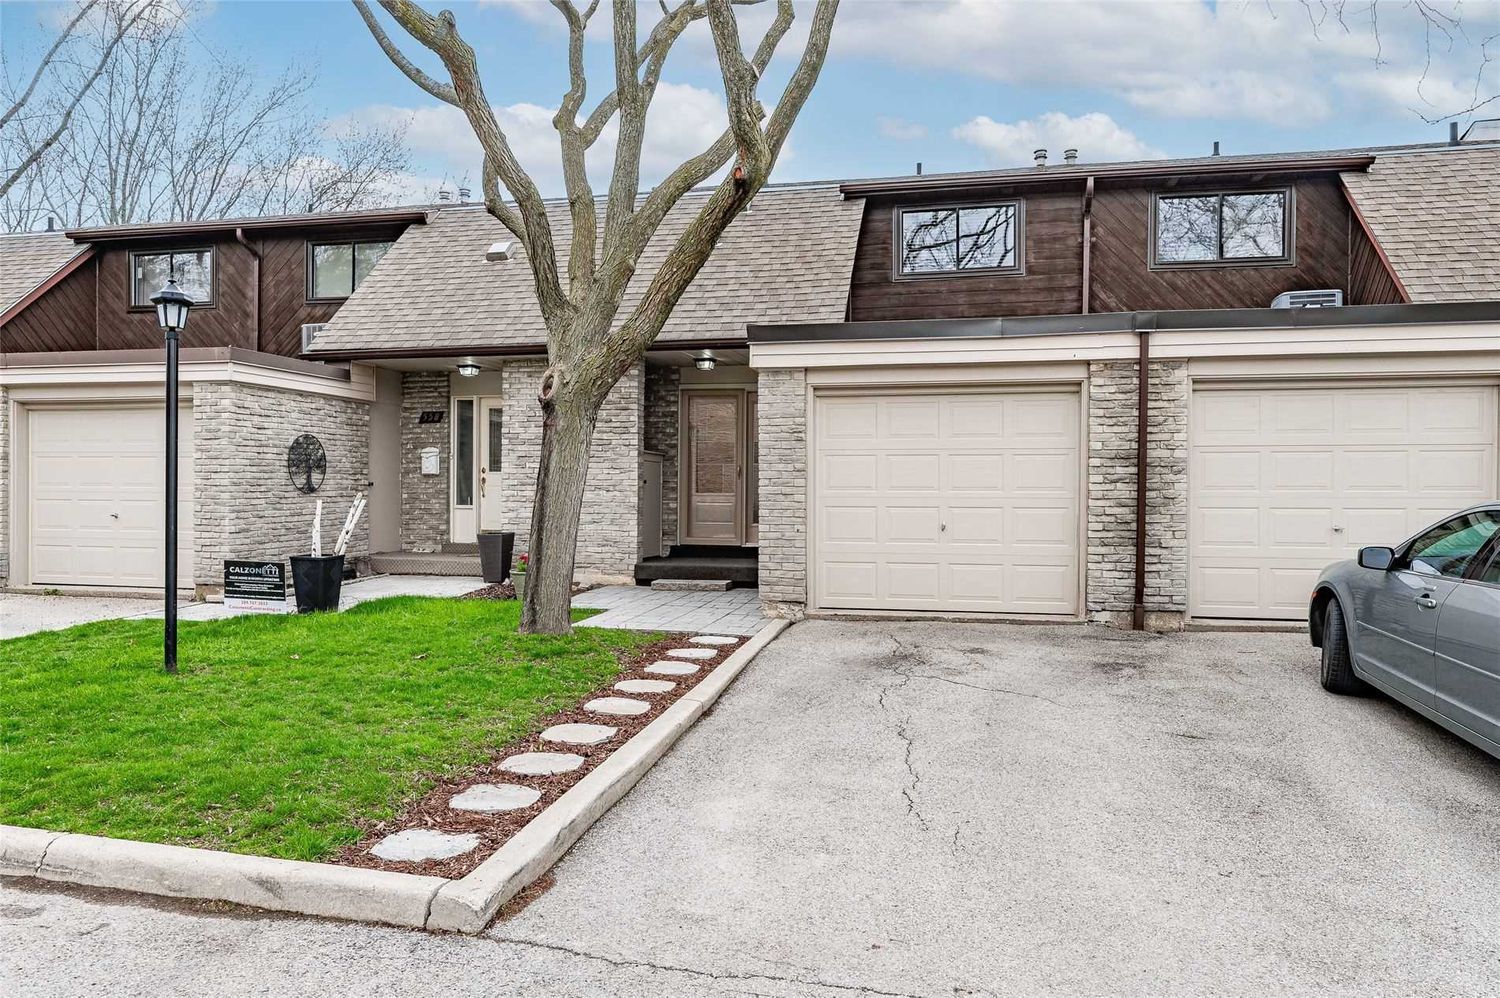 510-594 Forestwood Crescent. 557 Wedgewood Drive Townhomes is located in  Burlington, Toronto - image #1 of 2